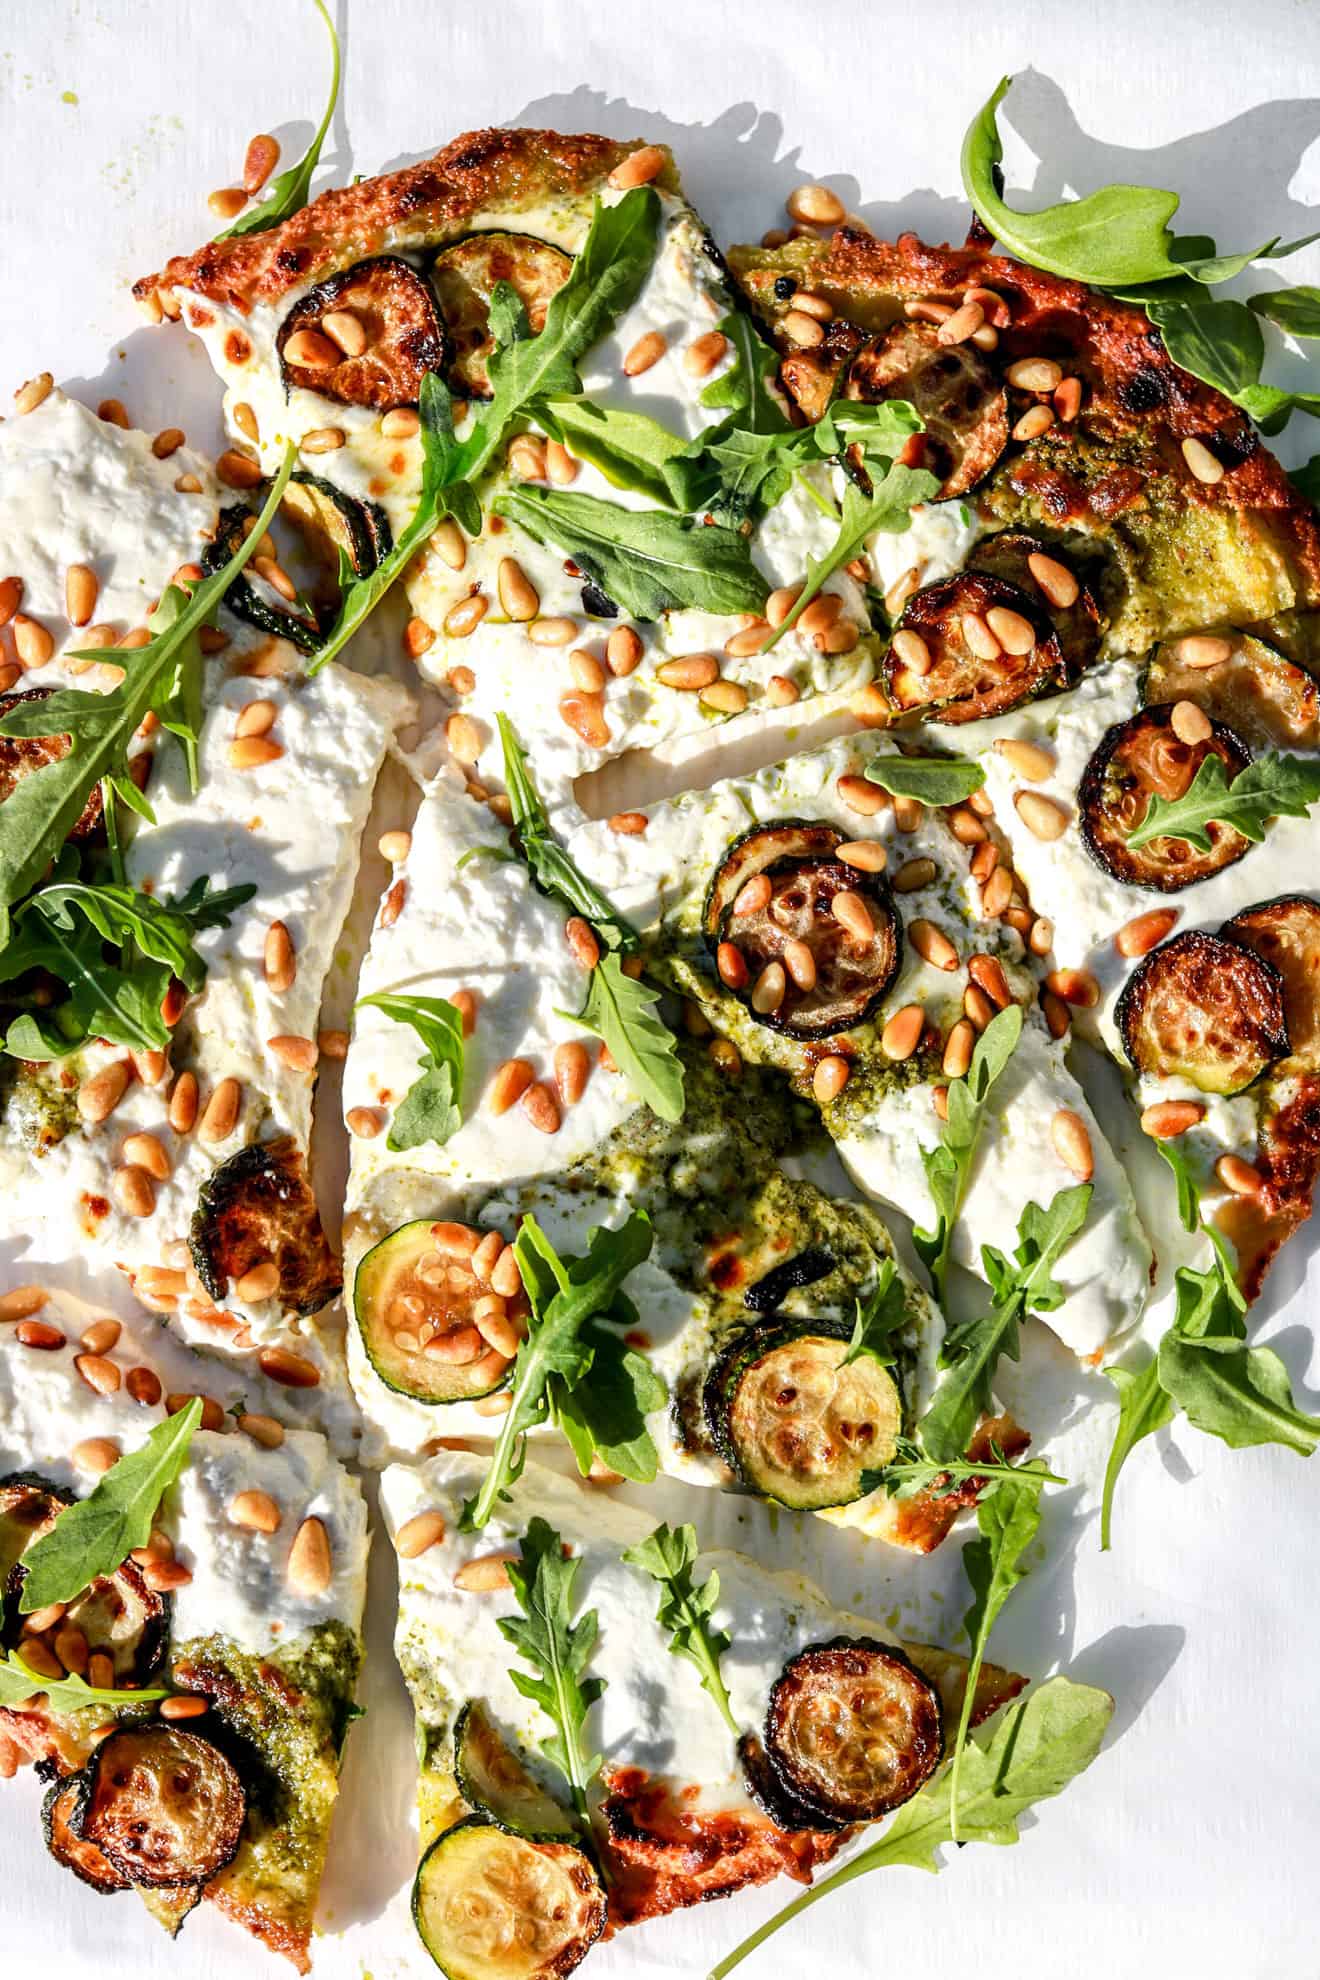 cauliflower flatbread topped with zucchini, burrata, and pine nuts cut into slices in sunlight on white background